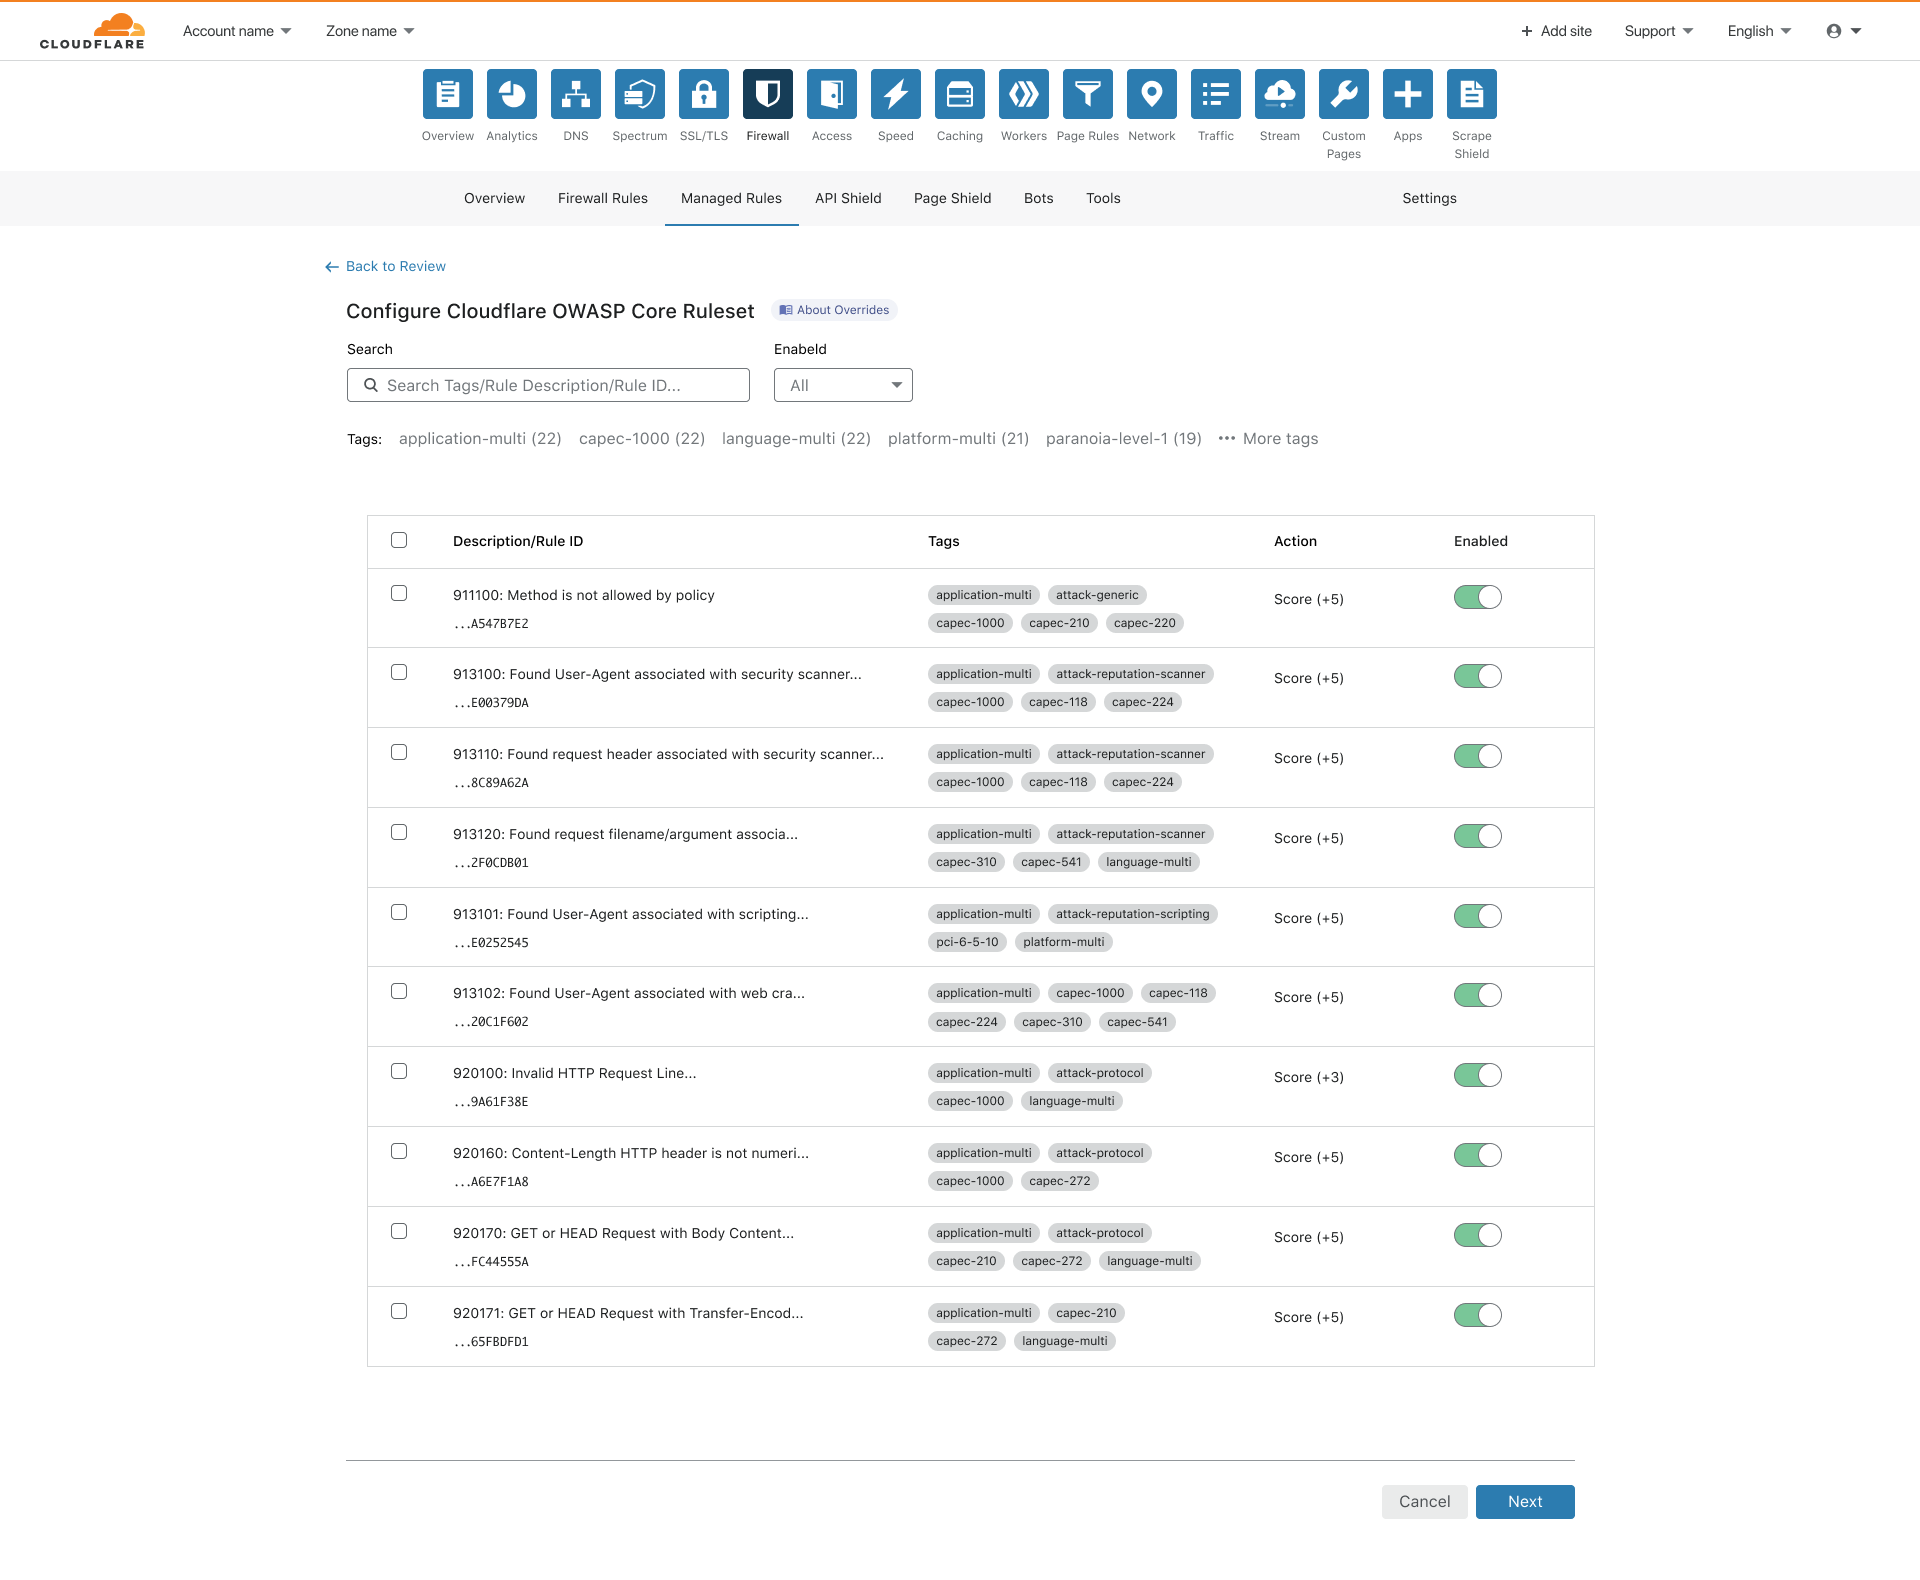 The Cloudflare OWASP Core Ruleset